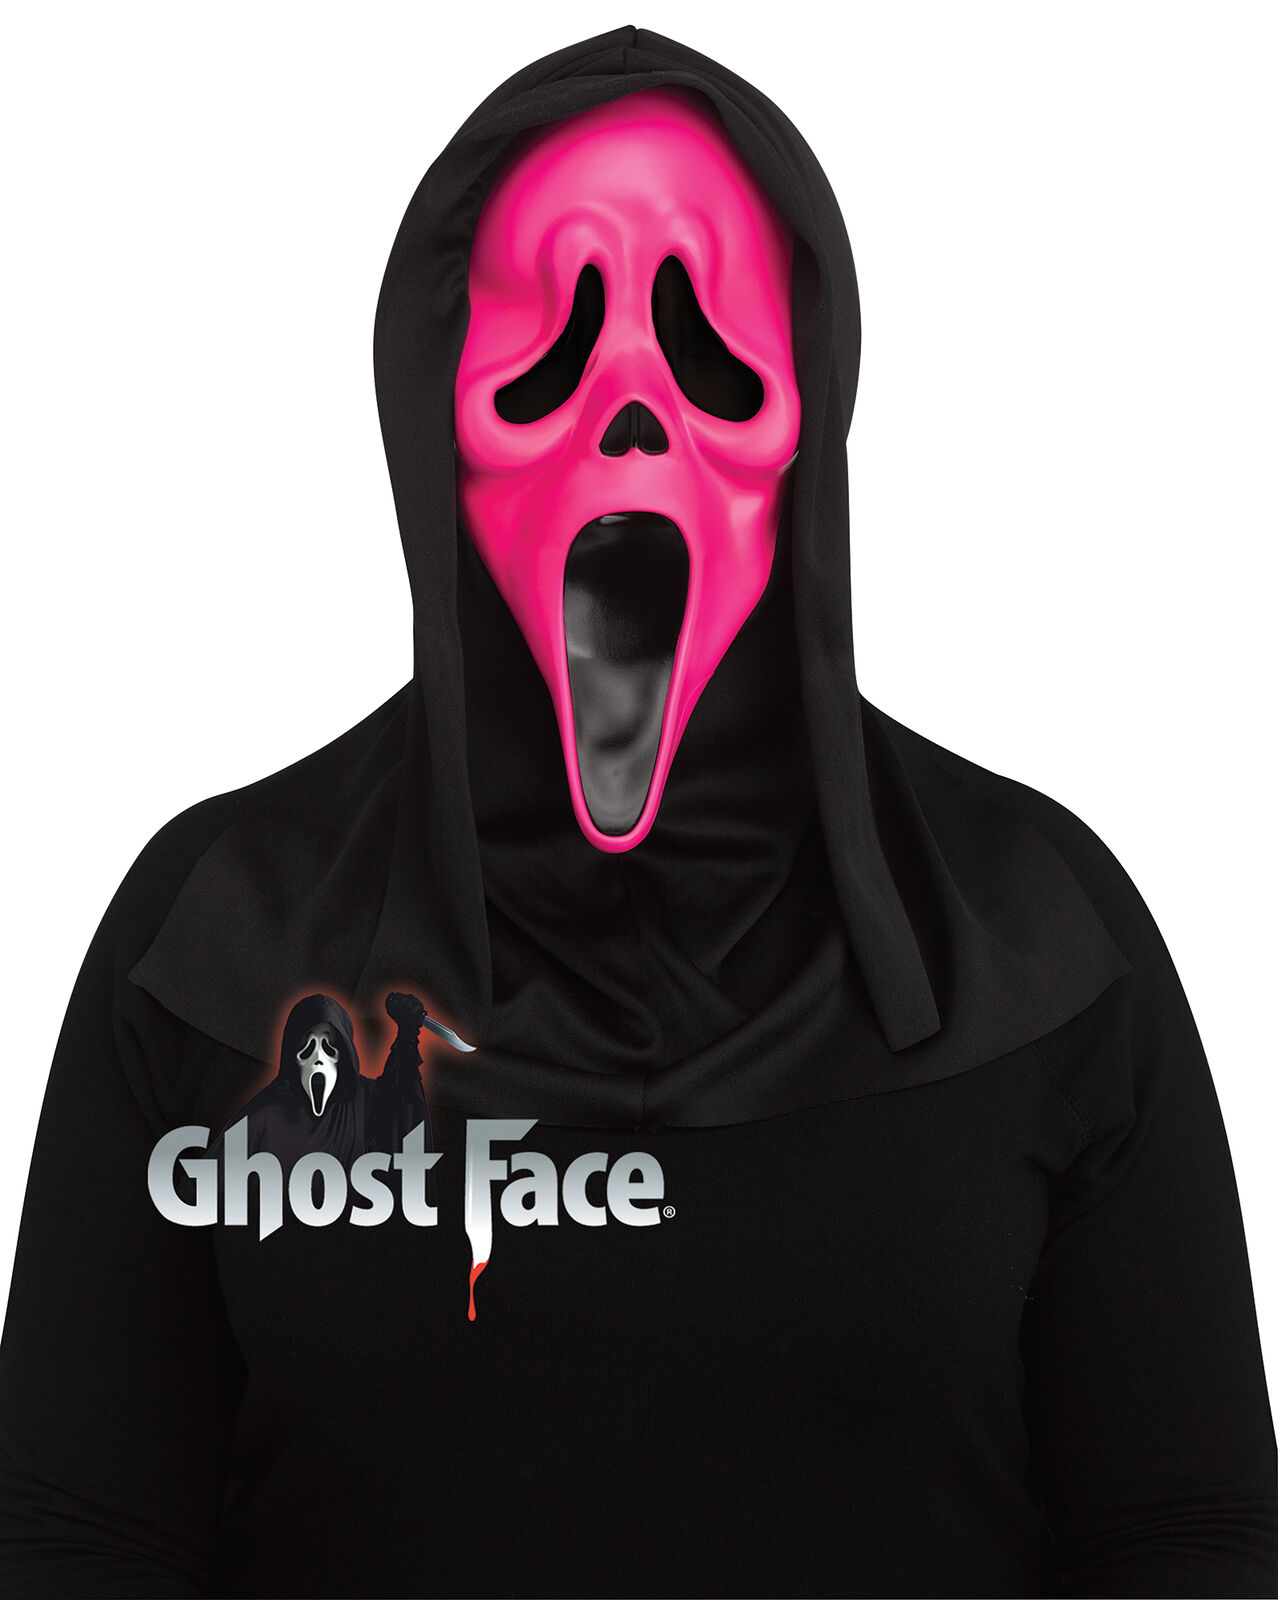 Hot Pink Fluorescent Ghost Face Mask Adult Costume Accessory NEW Scream